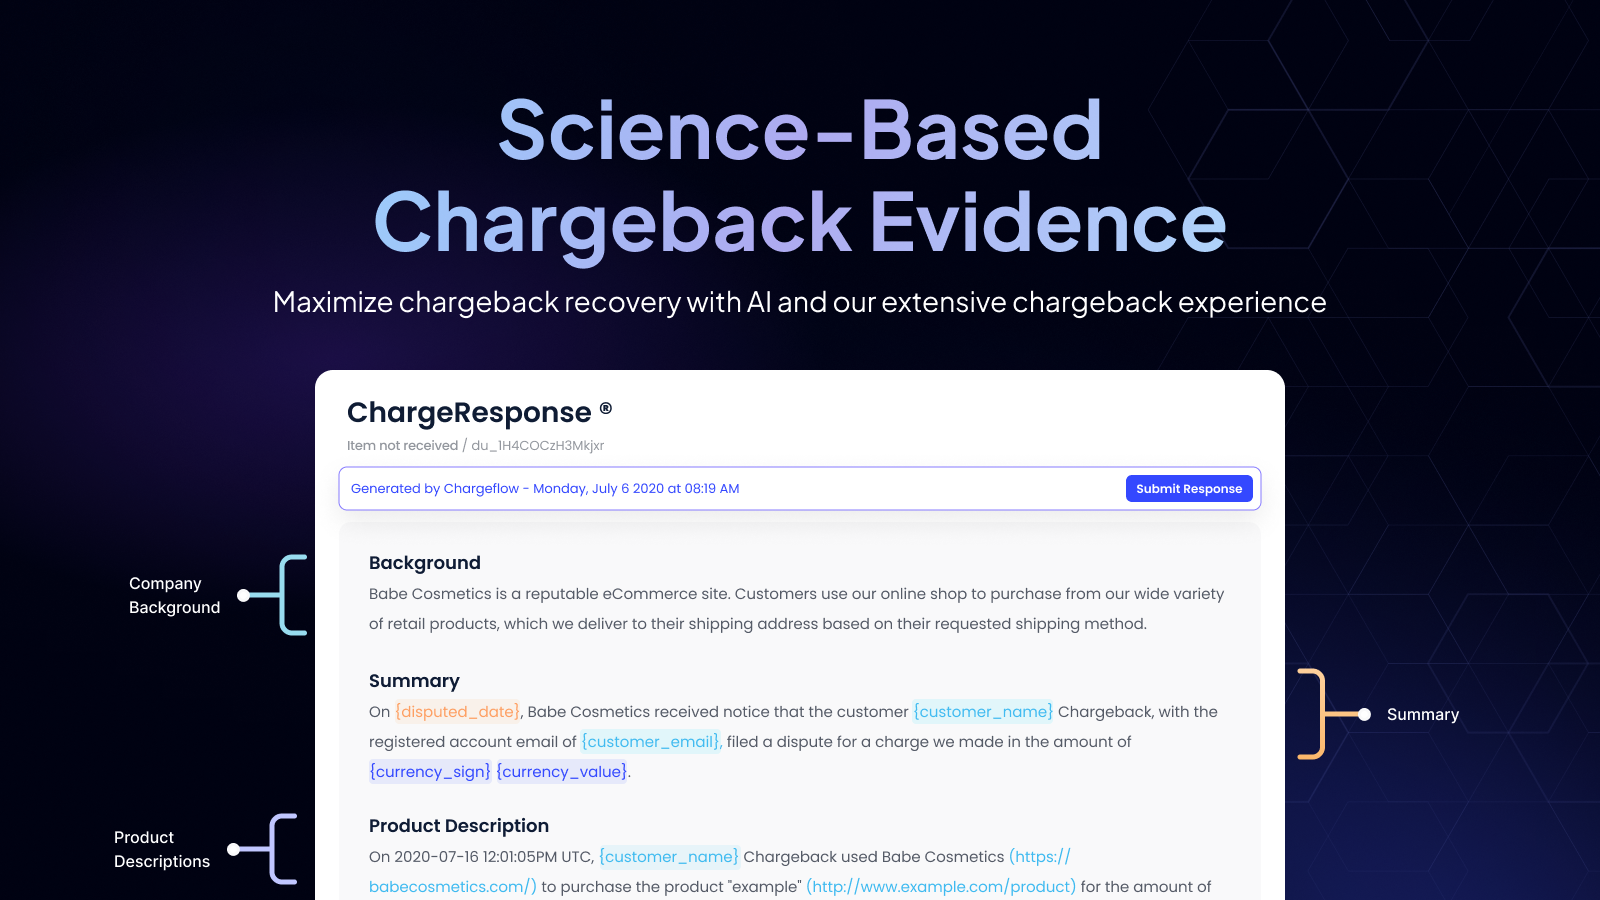 Science-based chargeback evidence